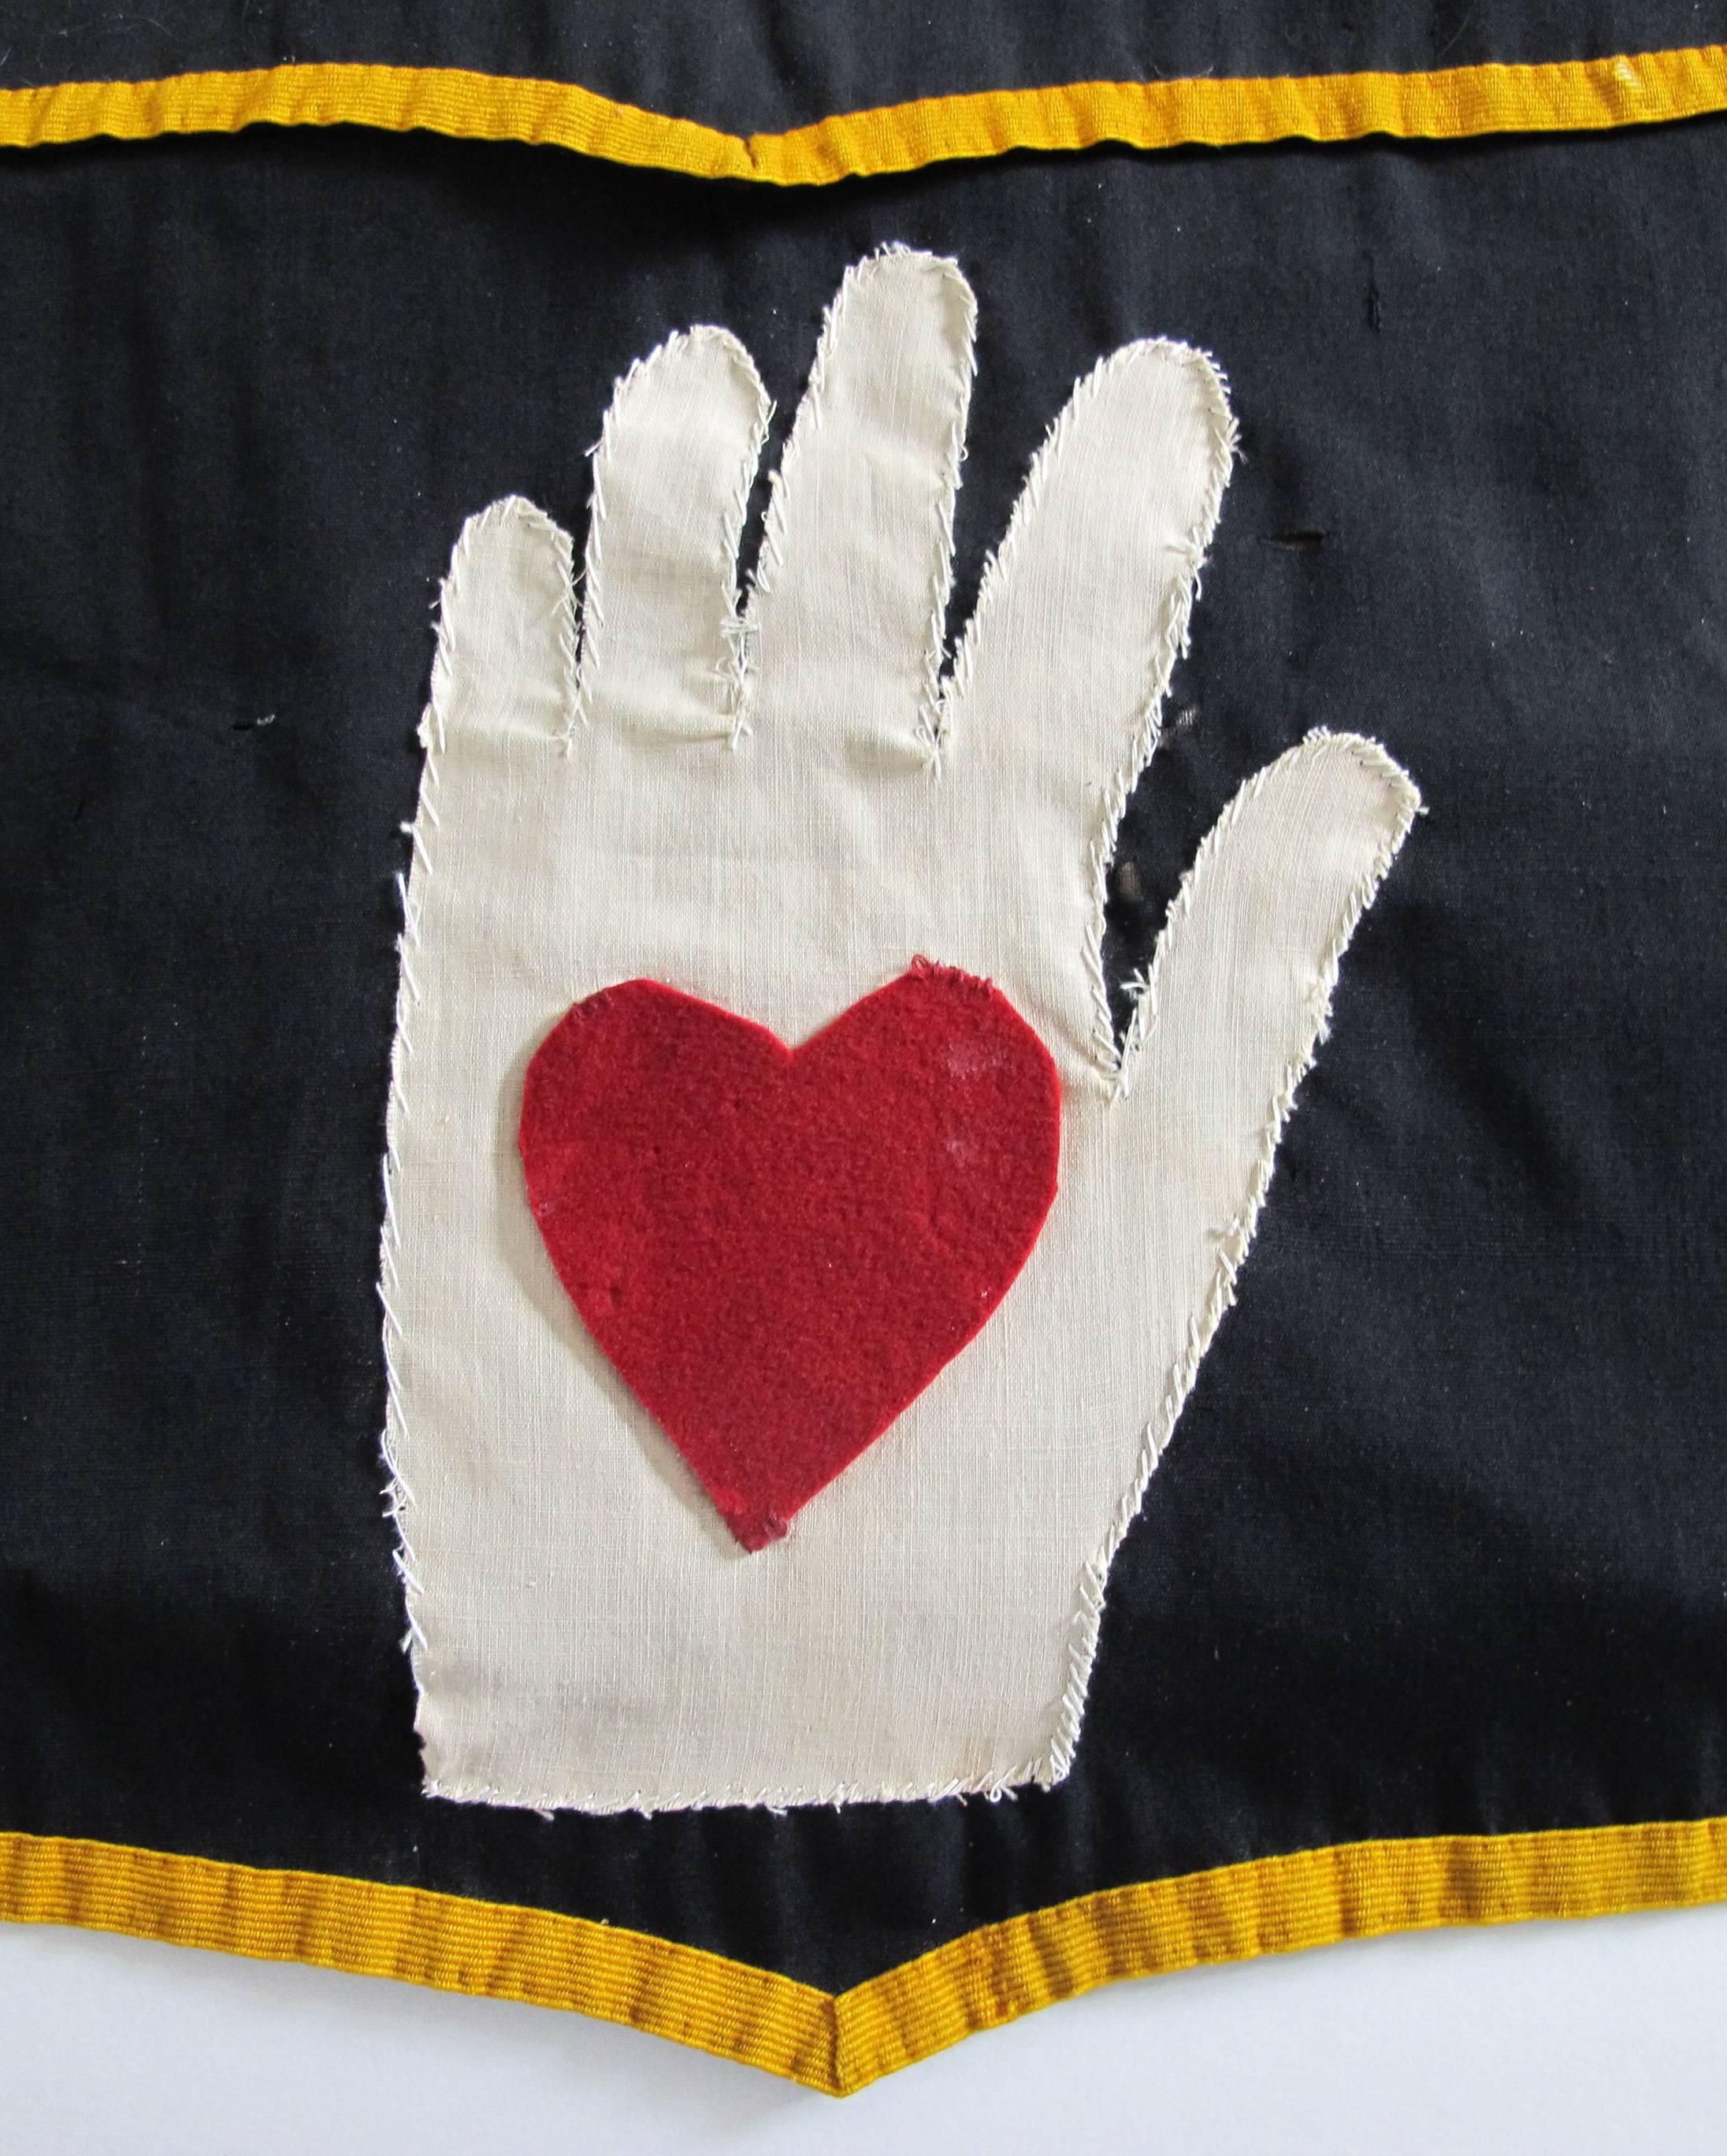 Rare fraternal lodge ceremonial apron from an Odd Fellows Lodge. The heart in hand was one of the primary symbols used to express charity and brotherly love.
This appears to be hand-cut and sewn rather than being made by one of the companies that